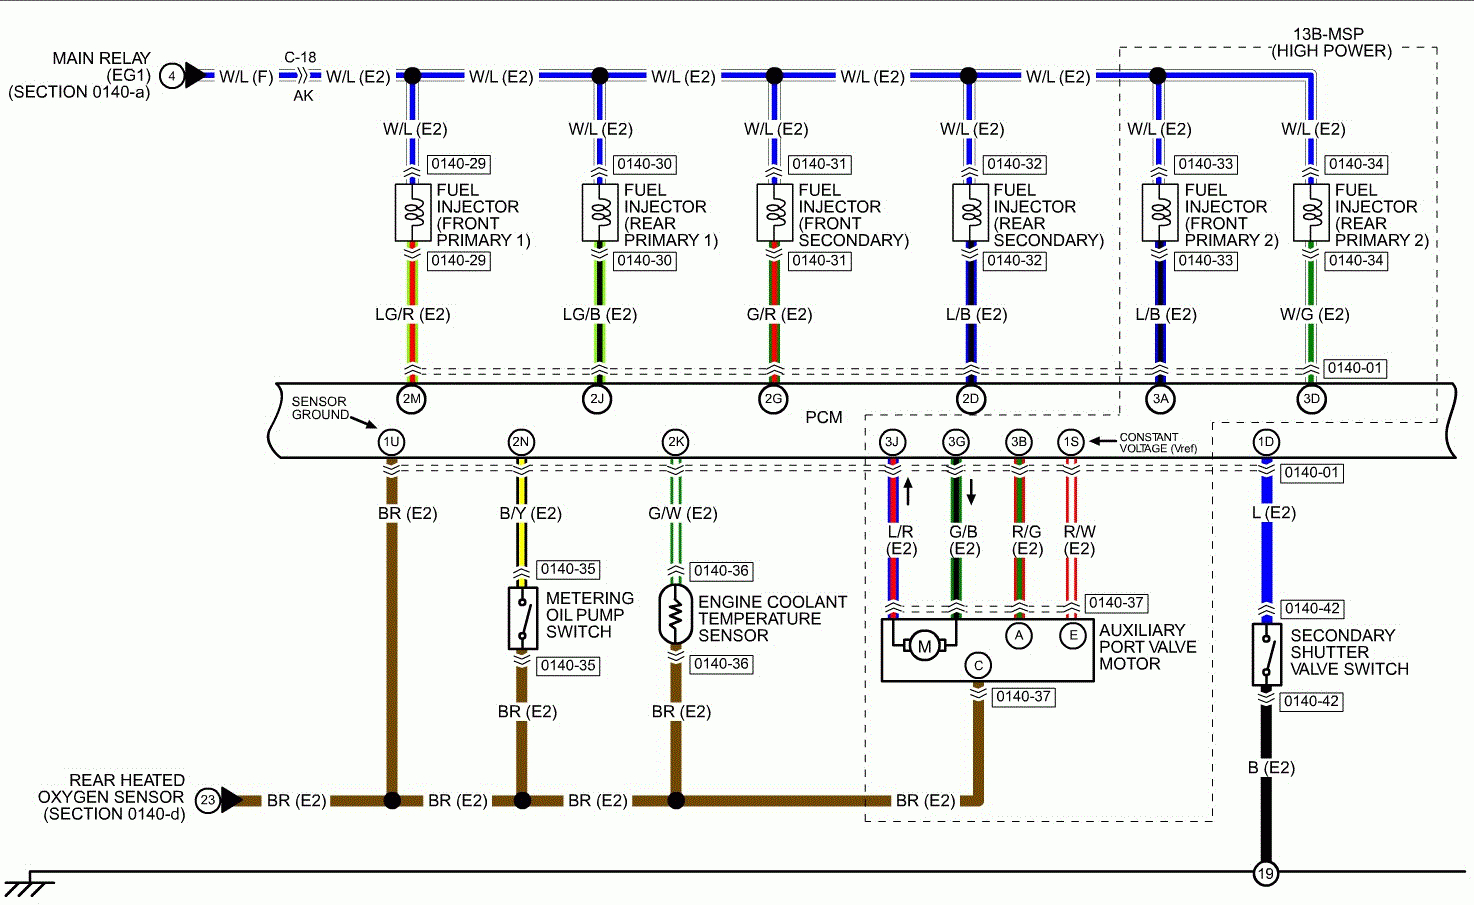 Fuel Injector Wiring Diagram - All Wiring Diagram Data - Fuel Injector Wiring Diagram